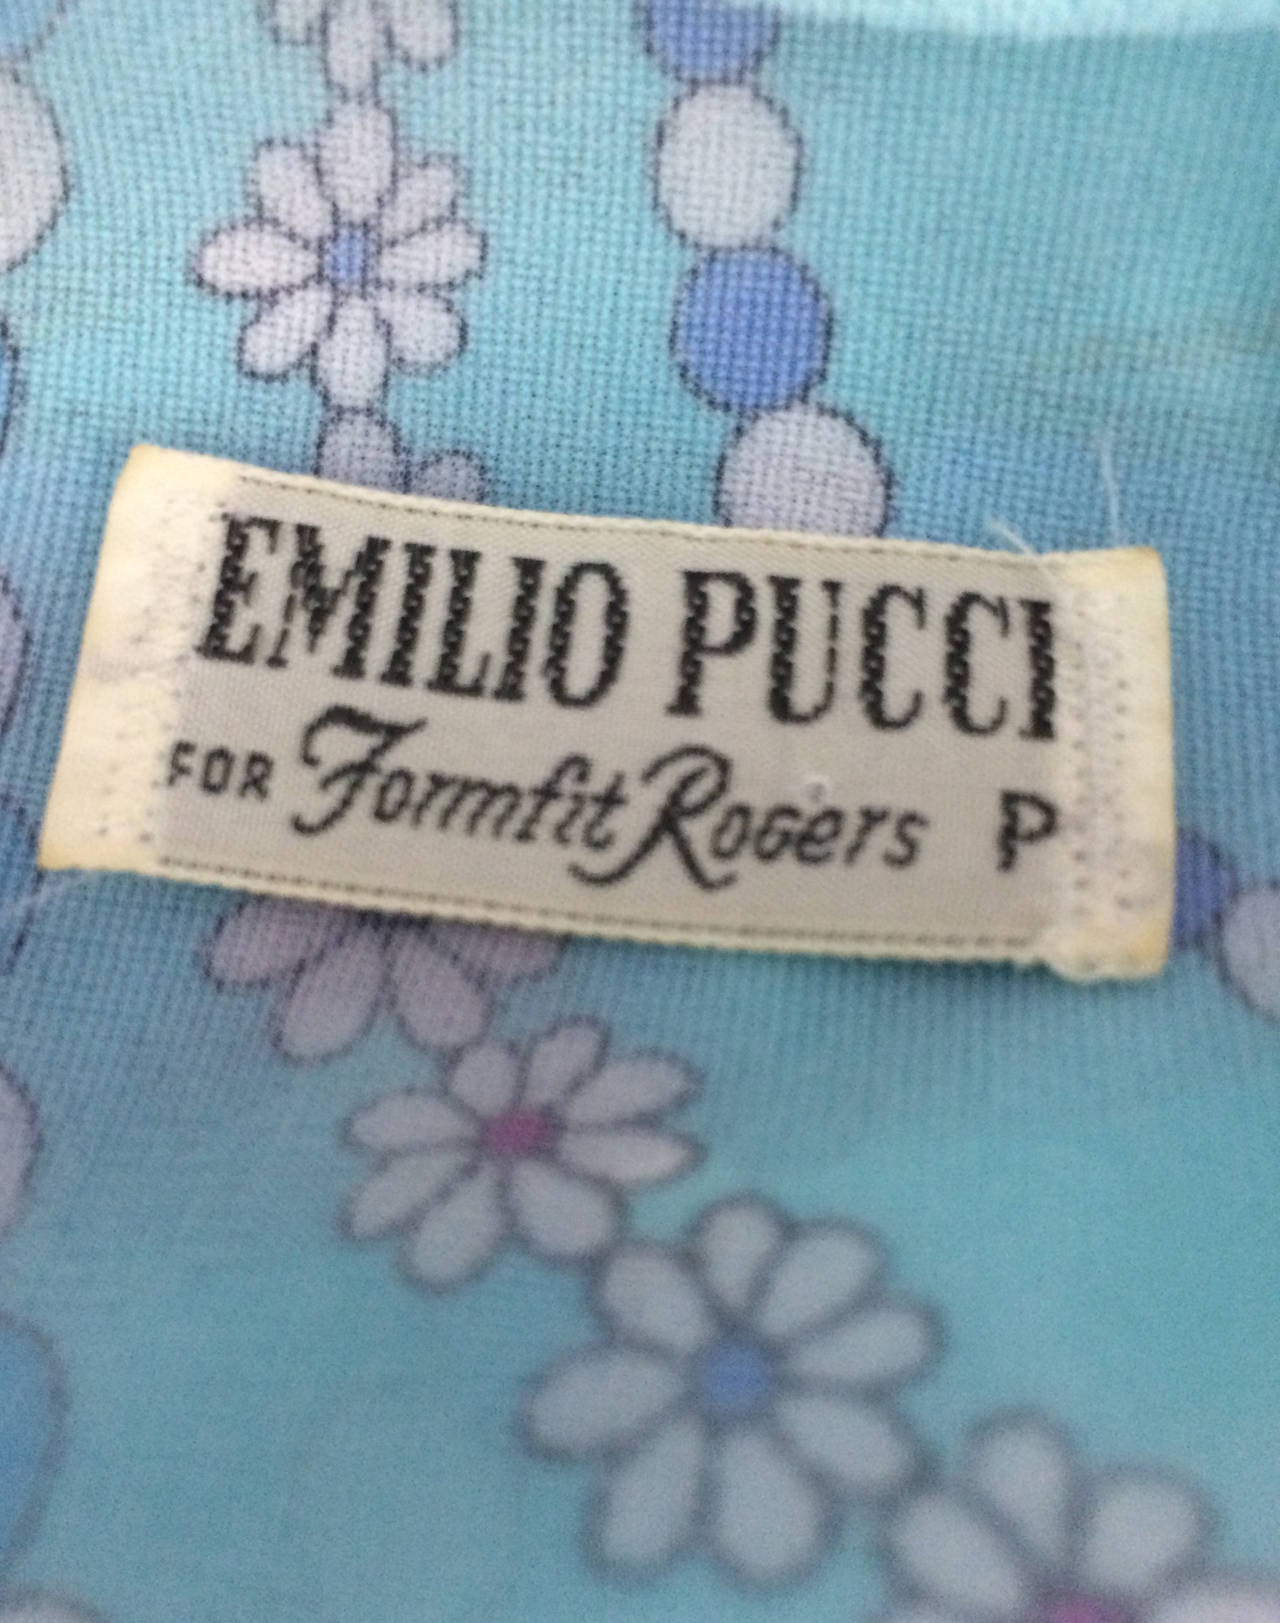 1960s Emilio Pucci for Formfit Rogers at home gown 4